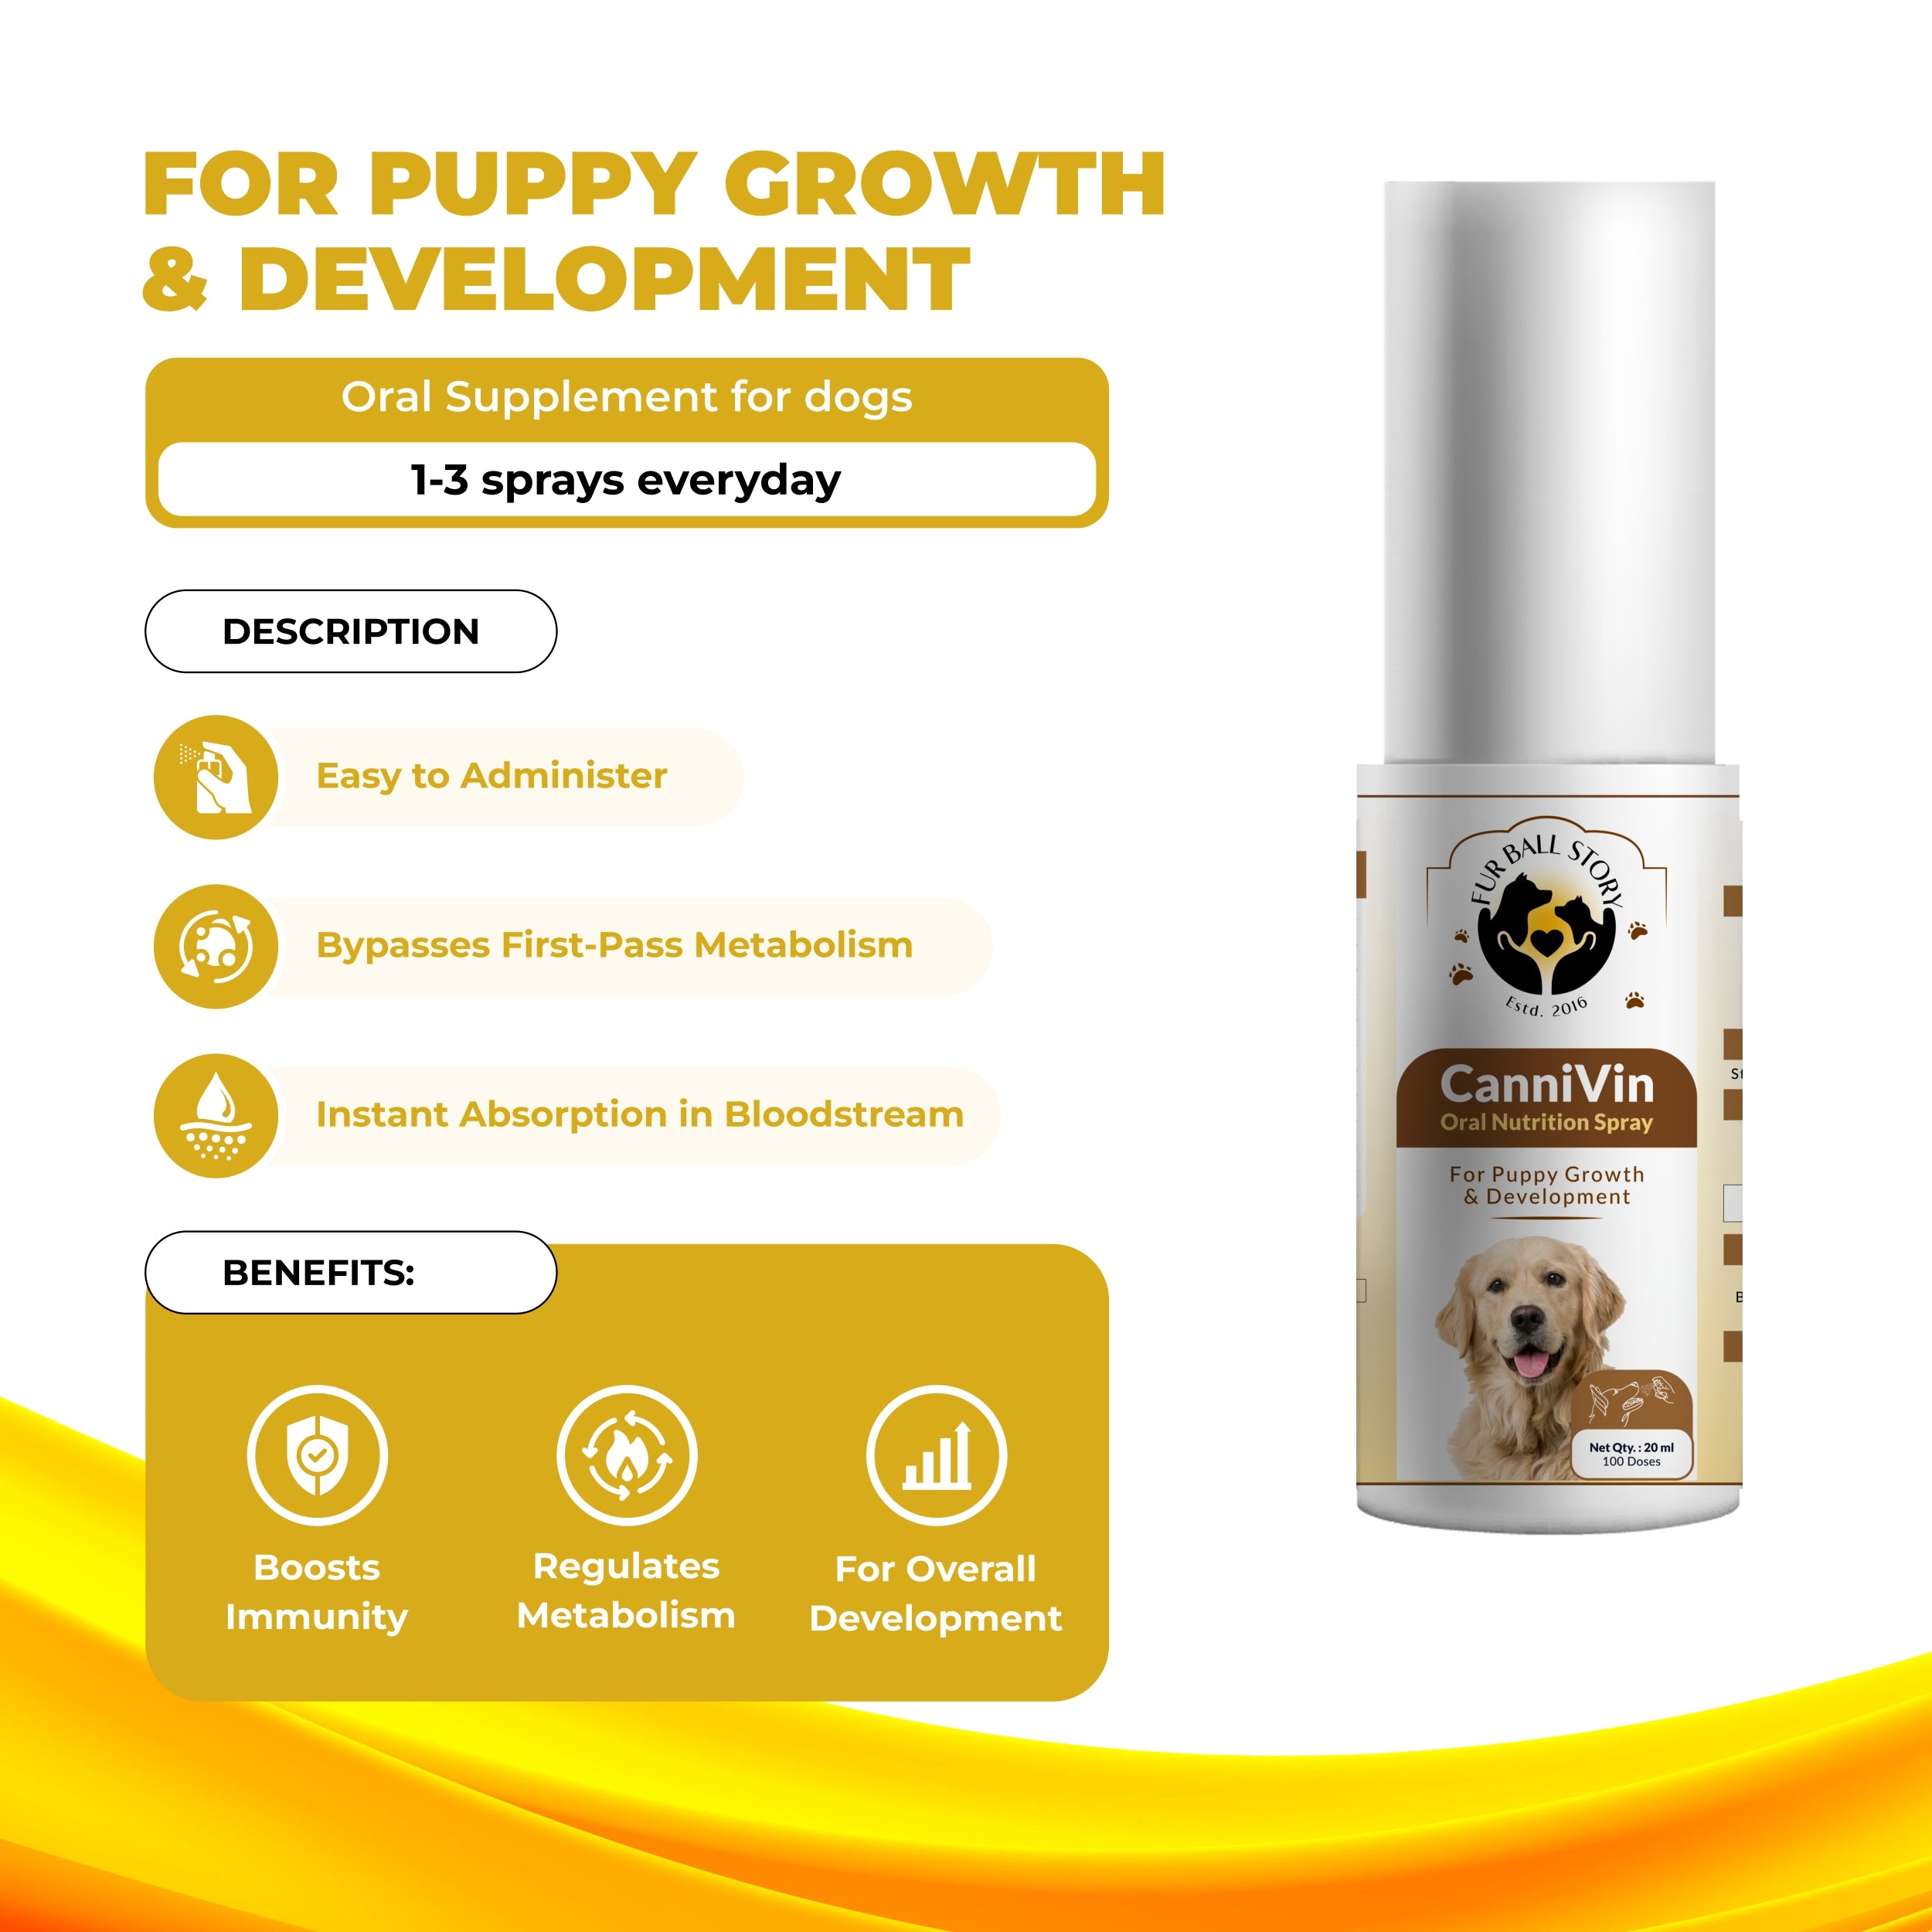 Puppy supplements for growth